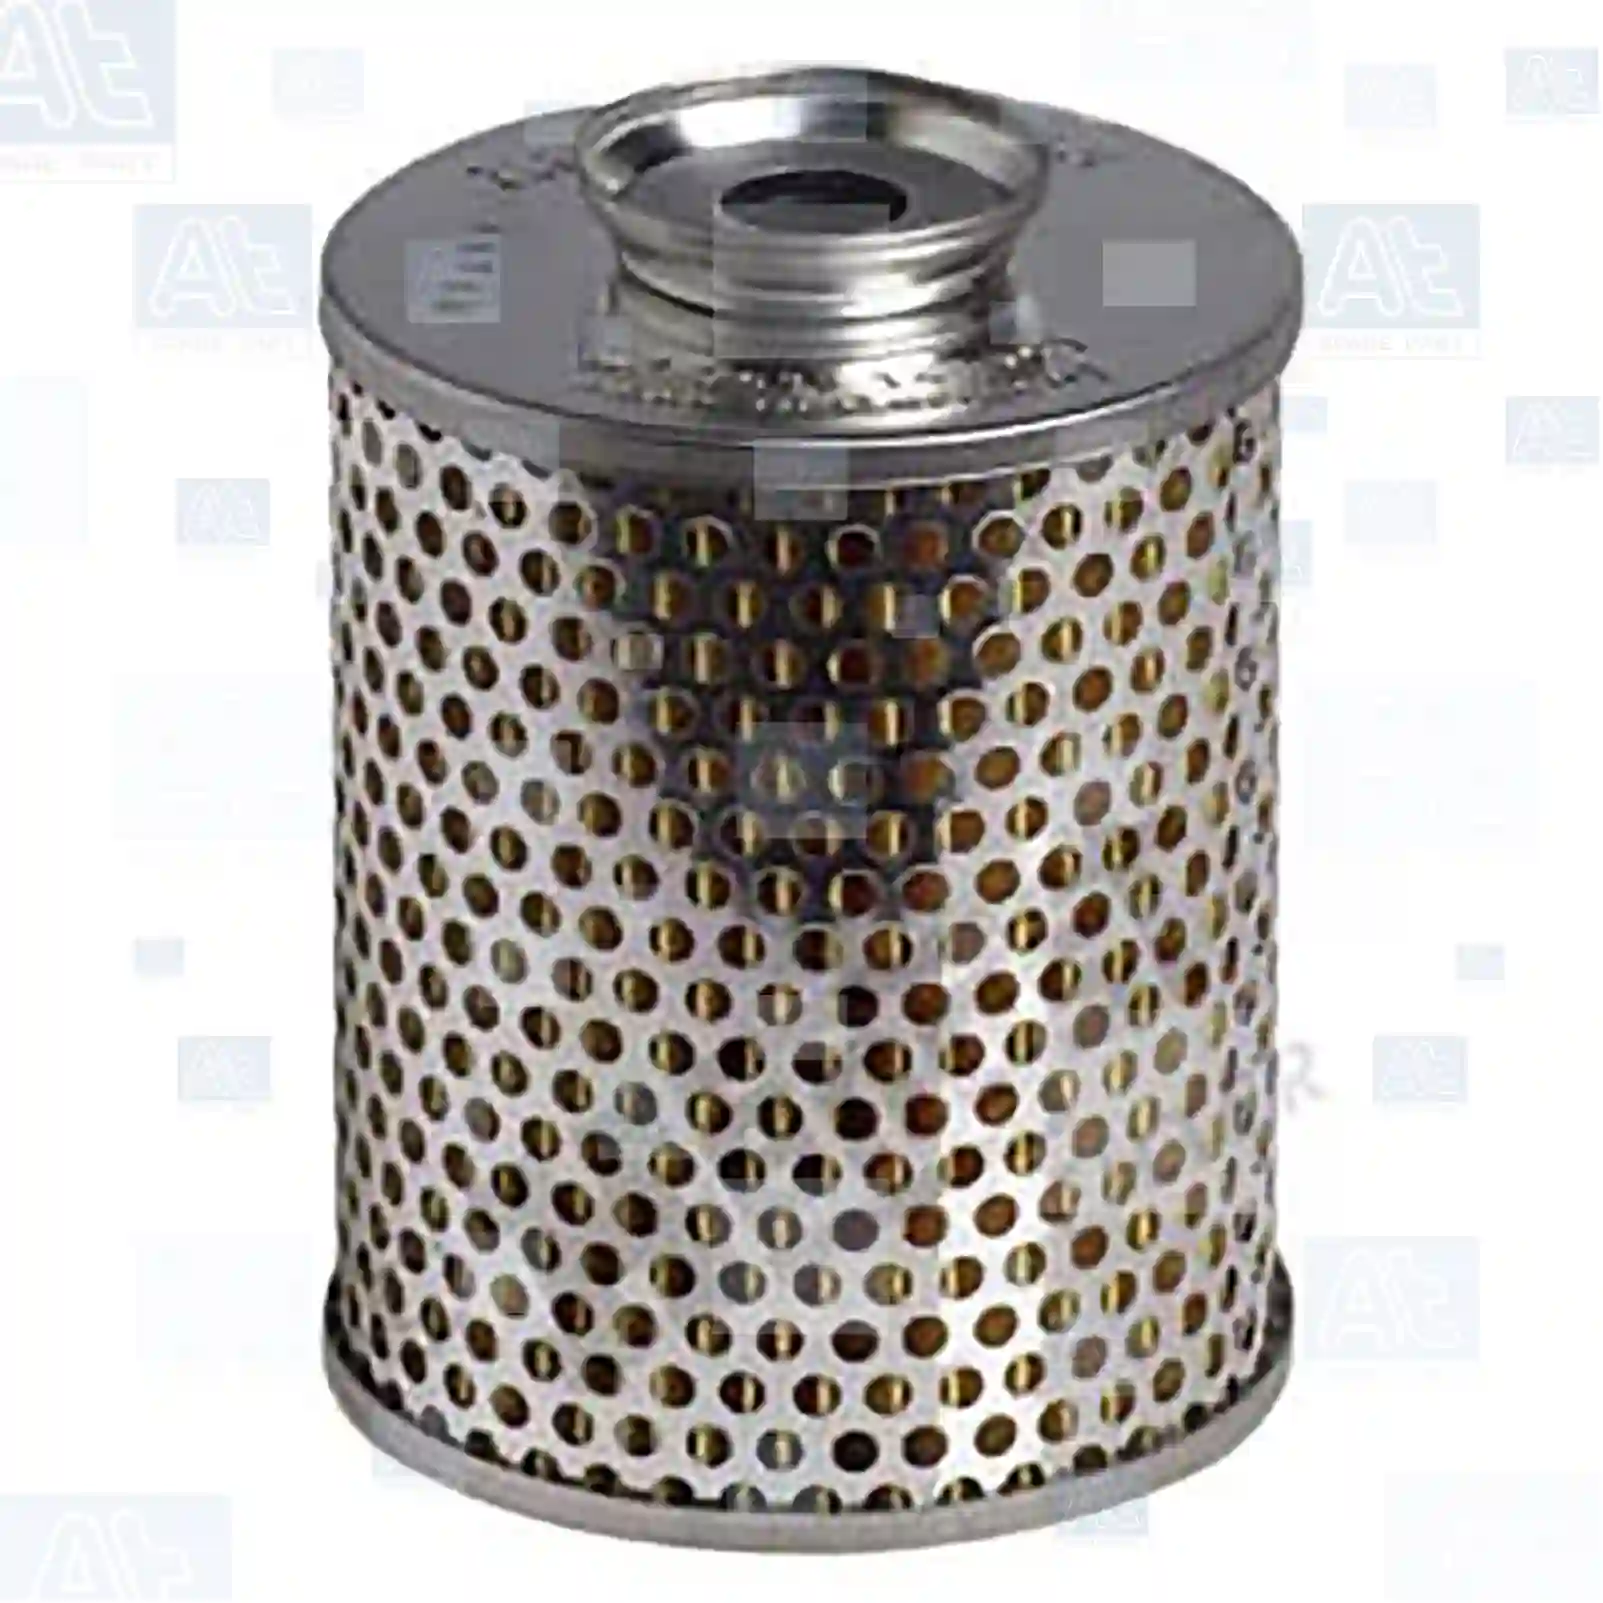 Oil filter insert, 77704975, 00507826, 00565955, 00641276, 00641285, 00782301, 00782318, 00908251, 4398149, 4502498, 4502499, 45024994, 74502499, 74734248, B2499, B4844, ZE67267000, 33710530209, 0713069901, 0713069902, 711224U, 7633141101, 807200756, 011541, 018152AB, 08152AB, 08926AB, 10017, A27302, VT3427, 9Y-4499, 1121689, 1121694, 1123151, 1123152, 1403695, 1405639, 1685241, 1711791, 1711971, 1723382, 1733882, 1821552, 200136, 302496, 3113311, 3990068, 645635, 645638, 646535, 647519, 6473475, 649421, 654638, 731125, 808042, 852758, 861032, 8990041, 8990044, 8990068, 907630, 909335, 911208, HA302494, HA302496, J0302496, J0647345, J0909335, J3990068, J8990041, J8990068, SP302496, 0001334980, 0302043, 1500662, 302043, 474910, 47491000, 01267900, 01909104, 1111601953100, 605412920001, 7633141101, 87511382178, 37843, 1111601953100, 7633141101, 1190514, 1B1365, F284950030020, 01267900, 09912650, 72053001, 79912650, Y02549901, YO2549901, 5001748, 5001753, 5014391, 1420351, 5572499, 5572693, 5573444, 5574259, 5574470, 7984452, 1595109, 1595131, 1595509, 25012824, 5570003, 5570015, 5570148, 5570224, 5572509, 5572748, 5573444, 5574470, 5576049, 5970295, 7984861, 0001848525, 2941292M1, 773906234, 921488, 019467, 0228051, 00883834, 00912650, 01267900, 02992056, 09912650, 75174, 01267900, 87511382178, 0003634631, 1267900, L976, 7594031901, 09912650, 72053001, 07633141101, 51055040007, 81055040007, 81055040051, 81055046001, 81473010002, 81473070001, 82055046001, 90807200756, 1014219, 1014290, 1086925, 1121694, 1324428, 1502470, 1509106, 1600011, 1712580, 1750581, 1750588, 1752177, 184522, 1900371, 2914292M1, 2941291M1, 2941292M1, 3144305M1, 620121, 620125, 620300, 620304, 620310, 620314, 623941, 624548, 624549, 642547, 642548, 642549, 671018, 671163M91, 671763, 826147, 830910, 835817, 840293M91, 840751M91, 841241M91, 841244, 81055040007, 0000940004, 0001800209, 0001848525, 0004660004, 0004660006, 6274660004, 8225007022, 605412920001, 1220037, 1220210, 122323, 12237, 1490764, 15434A, 85010, 350571, F350571, G0350571, 546078271, 0003563604, 0403316240, 0500255463, 0500255643, 4033162440, 5000255463, 5000255643, 6005019556, 00002005216, 1327488, 134419, 168185, 205727S1, 7633141101, 8225007022, 295470705, 1685242, 197482, 341722, 395436ND, 395488, 519836, 520829, PA351405, 9921008600, 98067, 98072, 98092, 323139, 3231396, 3231596, 40151102, 6234582, 807200755, 0117980, 101687, 117980B, 203592, 32101, 509026, 5272, 960294, A117980B, UP203592, 5818, 645636, 0010724303, ZG03045-0008 ||  77704975 At Spare Part | Engine, Accelerator Pedal, Camshaft, Connecting Rod, Crankcase, Crankshaft, Cylinder Head, Engine Suspension Mountings, Exhaust Manifold, Exhaust Gas Recirculation, Filter Kits, Flywheel Housing, General Overhaul Kits, Engine, Intake Manifold, Oil Cleaner, Oil Cooler, Oil Filter, Oil Pump, Oil Sump, Piston & Liner, Sensor & Switch, Timing Case, Turbocharger, Cooling System, Belt Tensioner, Coolant Filter, Coolant Pipe, Corrosion Prevention Agent, Drive, Expansion Tank, Fan, Intercooler, Monitors & Gauges, Radiator, Thermostat, V-Belt / Timing belt, Water Pump, Fuel System, Electronical Injector Unit, Feed Pump, Fuel Filter, cpl., Fuel Gauge Sender,  Fuel Line, Fuel Pump, Fuel Tank, Injection Line Kit, Injection Pump, Exhaust System, Clutch & Pedal, Gearbox, Propeller Shaft, Axles, Brake System, Hubs & Wheels, Suspension, Leaf Spring, Universal Parts / Accessories, Steering, Electrical System, Cabin Oil filter insert, 77704975, 00507826, 00565955, 00641276, 00641285, 00782301, 00782318, 00908251, 4398149, 4502498, 4502499, 45024994, 74502499, 74734248, B2499, B4844, ZE67267000, 33710530209, 0713069901, 0713069902, 711224U, 7633141101, 807200756, 011541, 018152AB, 08152AB, 08926AB, 10017, A27302, VT3427, 9Y-4499, 1121689, 1121694, 1123151, 1123152, 1403695, 1405639, 1685241, 1711791, 1711971, 1723382, 1733882, 1821552, 200136, 302496, 3113311, 3990068, 645635, 645638, 646535, 647519, 6473475, 649421, 654638, 731125, 808042, 852758, 861032, 8990041, 8990044, 8990068, 907630, 909335, 911208, HA302494, HA302496, J0302496, J0647345, J0909335, J3990068, J8990041, J8990068, SP302496, 0001334980, 0302043, 1500662, 302043, 474910, 47491000, 01267900, 01909104, 1111601953100, 605412920001, 7633141101, 87511382178, 37843, 1111601953100, 7633141101, 1190514, 1B1365, F284950030020, 01267900, 09912650, 72053001, 79912650, Y02549901, YO2549901, 5001748, 5001753, 5014391, 1420351, 5572499, 5572693, 5573444, 5574259, 5574470, 7984452, 1595109, 1595131, 1595509, 25012824, 5570003, 5570015, 5570148, 5570224, 5572509, 5572748, 5573444, 5574470, 5576049, 5970295, 7984861, 0001848525, 2941292M1, 773906234, 921488, 019467, 0228051, 00883834, 00912650, 01267900, 02992056, 09912650, 75174, 01267900, 87511382178, 0003634631, 1267900, L976, 7594031901, 09912650, 72053001, 07633141101, 51055040007, 81055040007, 81055040051, 81055046001, 81473010002, 81473070001, 82055046001, 90807200756, 1014219, 1014290, 1086925, 1121694, 1324428, 1502470, 1509106, 1600011, 1712580, 1750581, 1750588, 1752177, 184522, 1900371, 2914292M1, 2941291M1, 2941292M1, 3144305M1, 620121, 620125, 620300, 620304, 620310, 620314, 623941, 624548, 624549, 642547, 642548, 642549, 671018, 671163M91, 671763, 826147, 830910, 835817, 840293M91, 840751M91, 841241M91, 841244, 81055040007, 0000940004, 0001800209, 0001848525, 0004660004, 0004660006, 6274660004, 8225007022, 605412920001, 1220037, 1220210, 122323, 12237, 1490764, 15434A, 85010, 350571, F350571, G0350571, 546078271, 0003563604, 0403316240, 0500255463, 0500255643, 4033162440, 5000255463, 5000255643, 6005019556, 00002005216, 1327488, 134419, 168185, 205727S1, 7633141101, 8225007022, 295470705, 1685242, 197482, 341722, 395436ND, 395488, 519836, 520829, PA351405, 9921008600, 98067, 98072, 98092, 323139, 3231396, 3231596, 40151102, 6234582, 807200755, 0117980, 101687, 117980B, 203592, 32101, 509026, 5272, 960294, A117980B, UP203592, 5818, 645636, 0010724303, ZG03045-0008 ||  77704975 At Spare Part | Engine, Accelerator Pedal, Camshaft, Connecting Rod, Crankcase, Crankshaft, Cylinder Head, Engine Suspension Mountings, Exhaust Manifold, Exhaust Gas Recirculation, Filter Kits, Flywheel Housing, General Overhaul Kits, Engine, Intake Manifold, Oil Cleaner, Oil Cooler, Oil Filter, Oil Pump, Oil Sump, Piston & Liner, Sensor & Switch, Timing Case, Turbocharger, Cooling System, Belt Tensioner, Coolant Filter, Coolant Pipe, Corrosion Prevention Agent, Drive, Expansion Tank, Fan, Intercooler, Monitors & Gauges, Radiator, Thermostat, V-Belt / Timing belt, Water Pump, Fuel System, Electronical Injector Unit, Feed Pump, Fuel Filter, cpl., Fuel Gauge Sender,  Fuel Line, Fuel Pump, Fuel Tank, Injection Line Kit, Injection Pump, Exhaust System, Clutch & Pedal, Gearbox, Propeller Shaft, Axles, Brake System, Hubs & Wheels, Suspension, Leaf Spring, Universal Parts / Accessories, Steering, Electrical System, Cabin